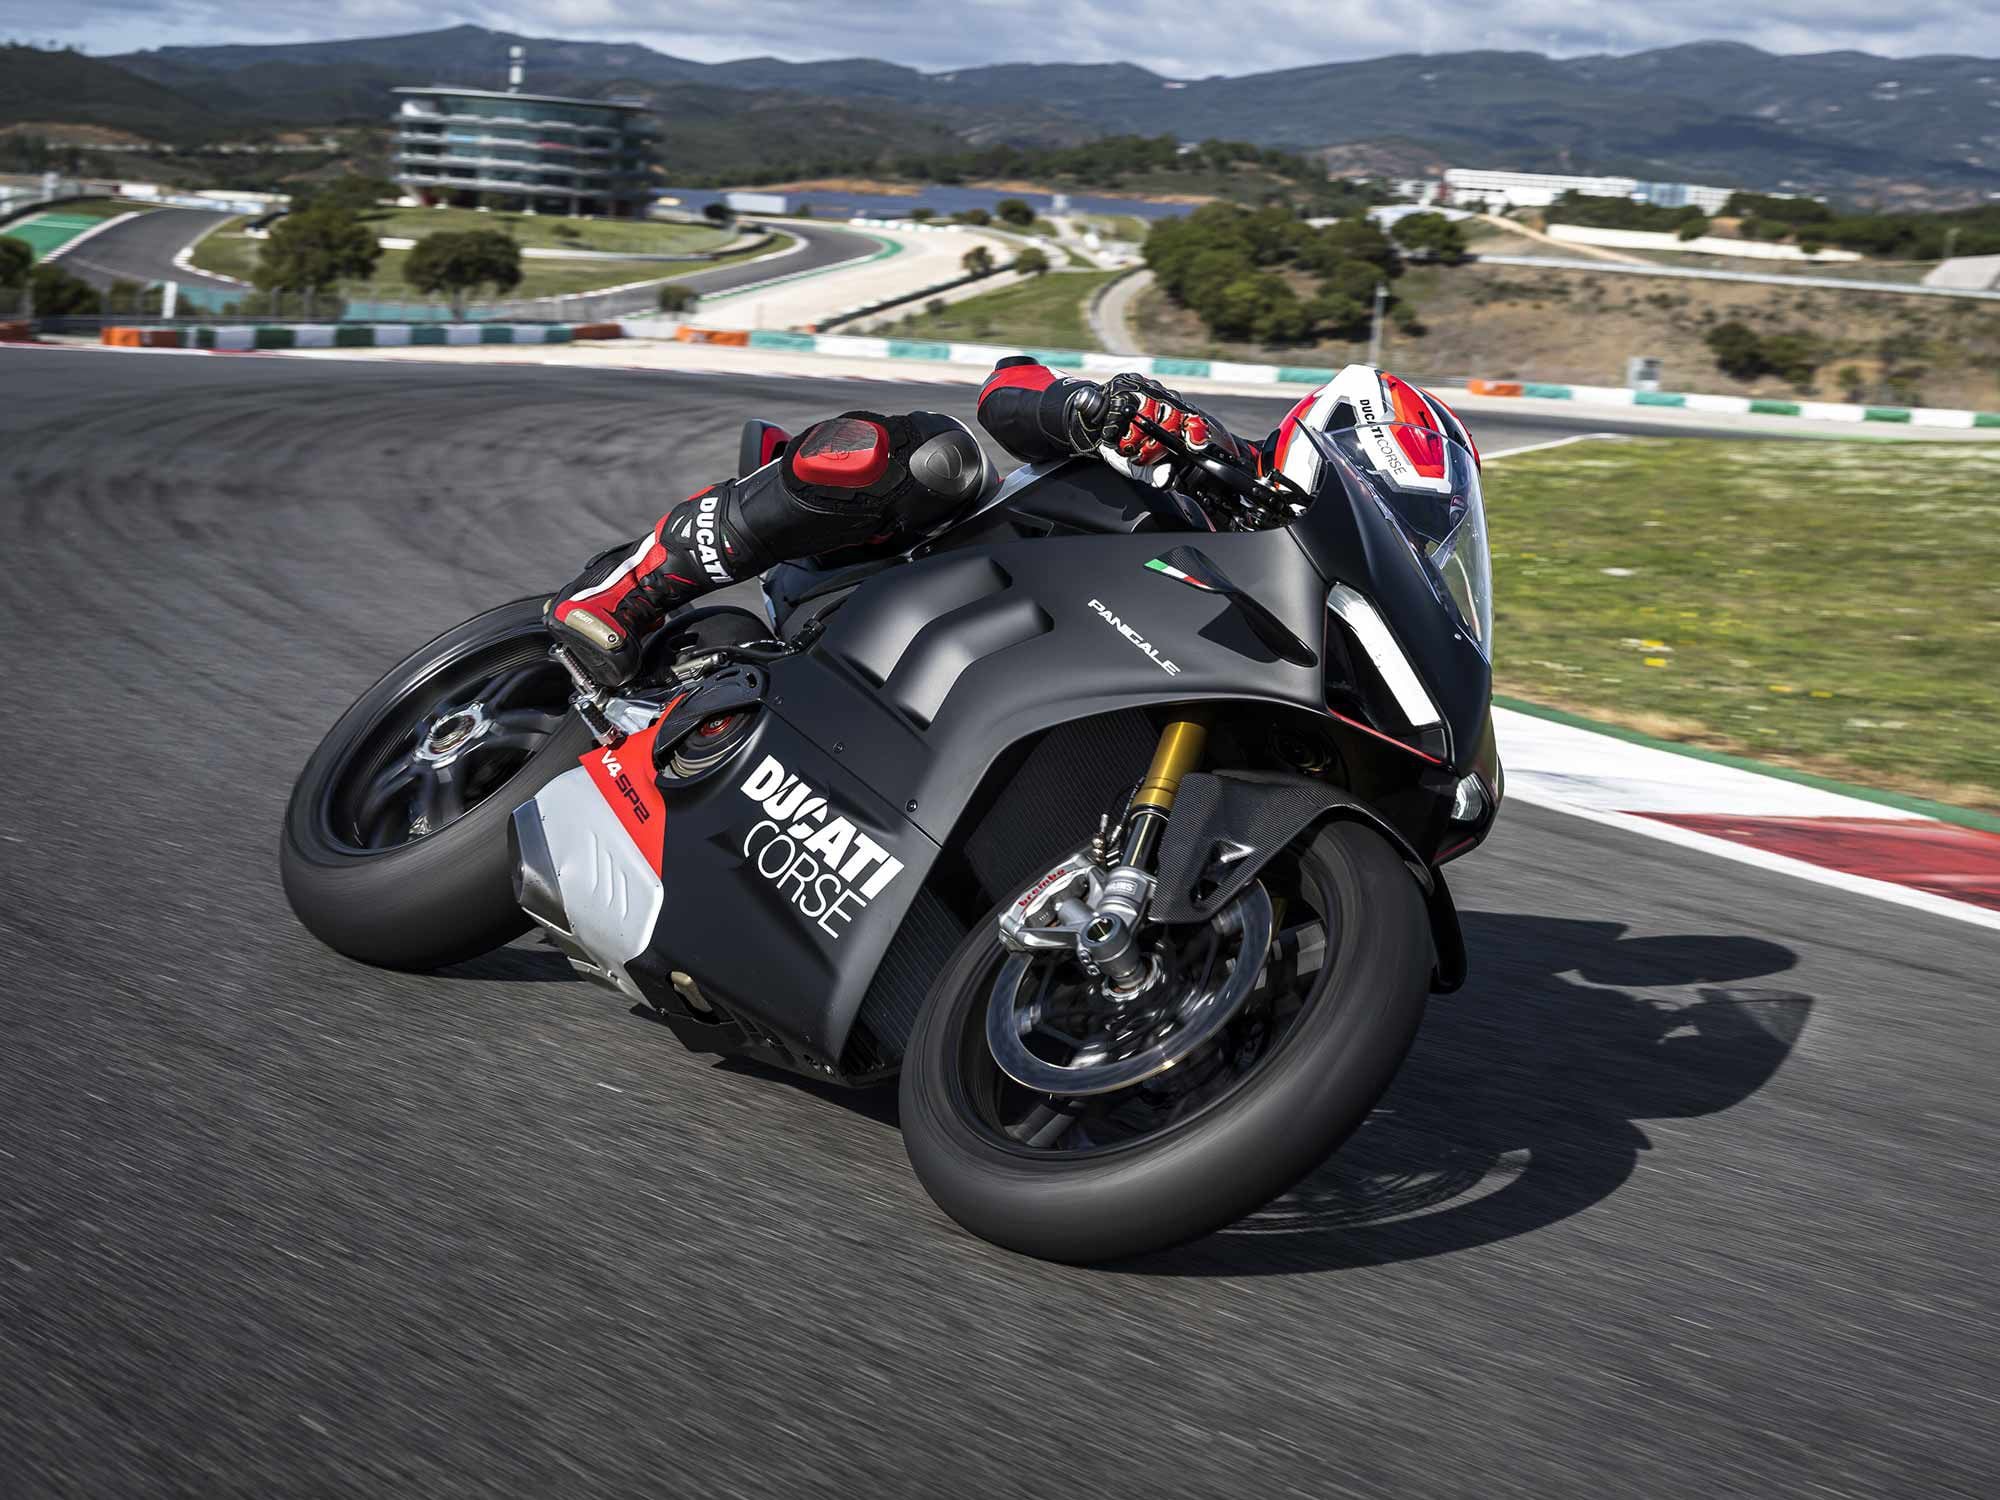 The Ducati Panigale V4 model has a crankshaft that rotates in the opposite direction. The 2022 SP2 model also features carbon fiber wheels. Ducati claims to be the most agile Panigale ever.